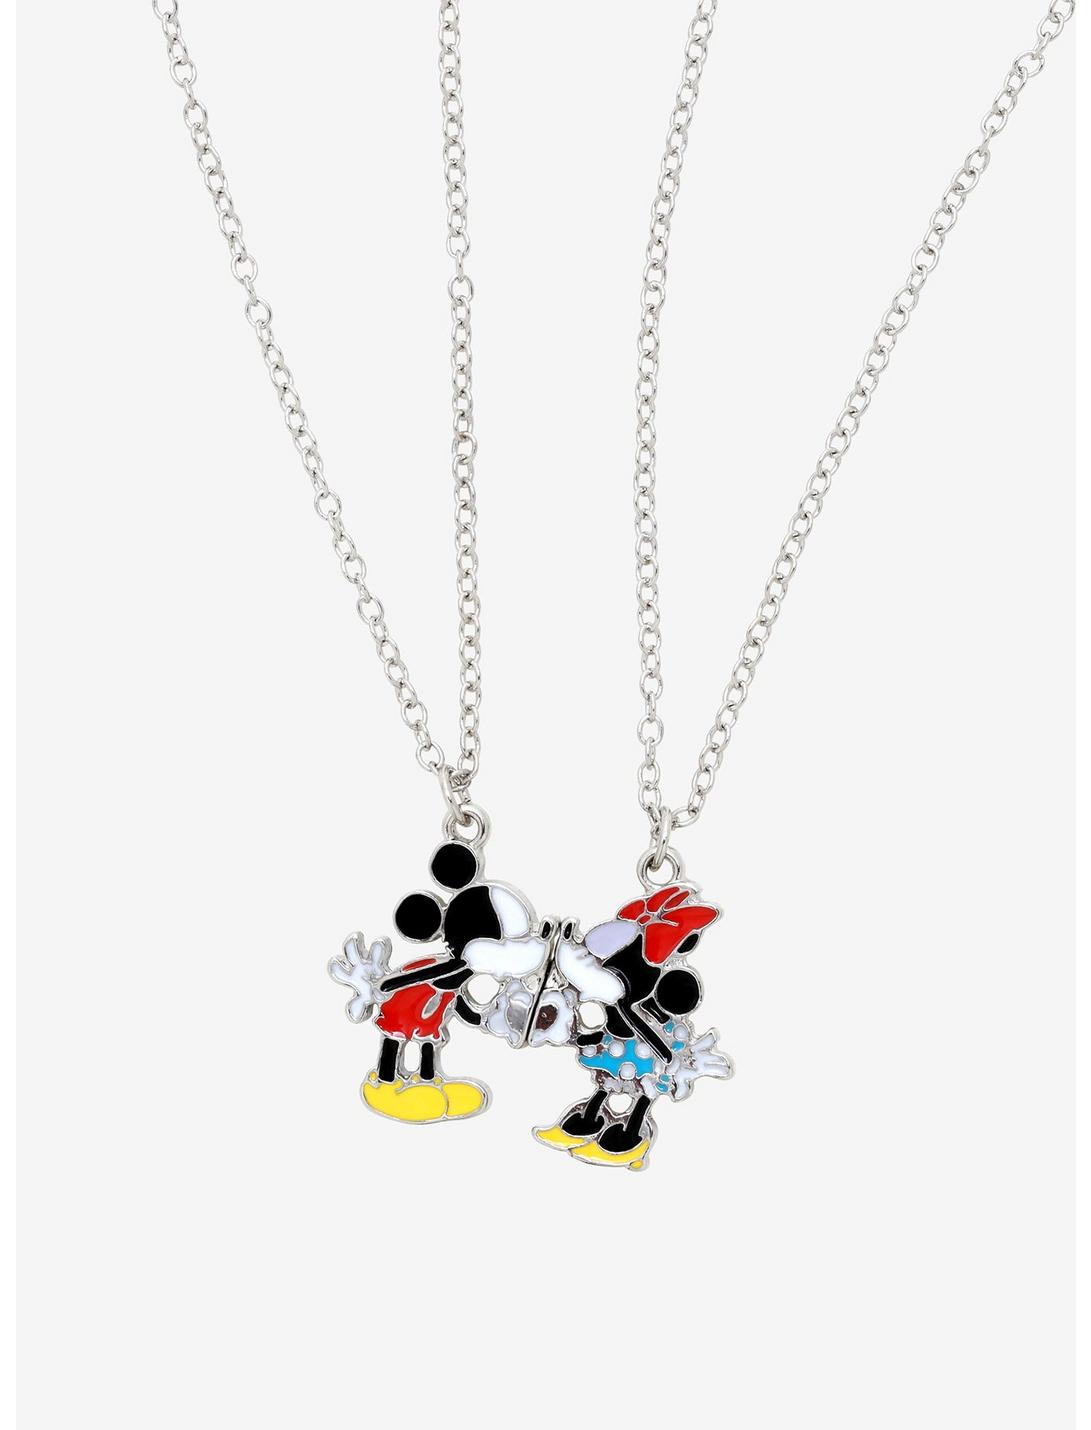 NEW Disney Parks Mickey Minnie Mouse Kissing Magnetic Eyes Close Keychain Set 